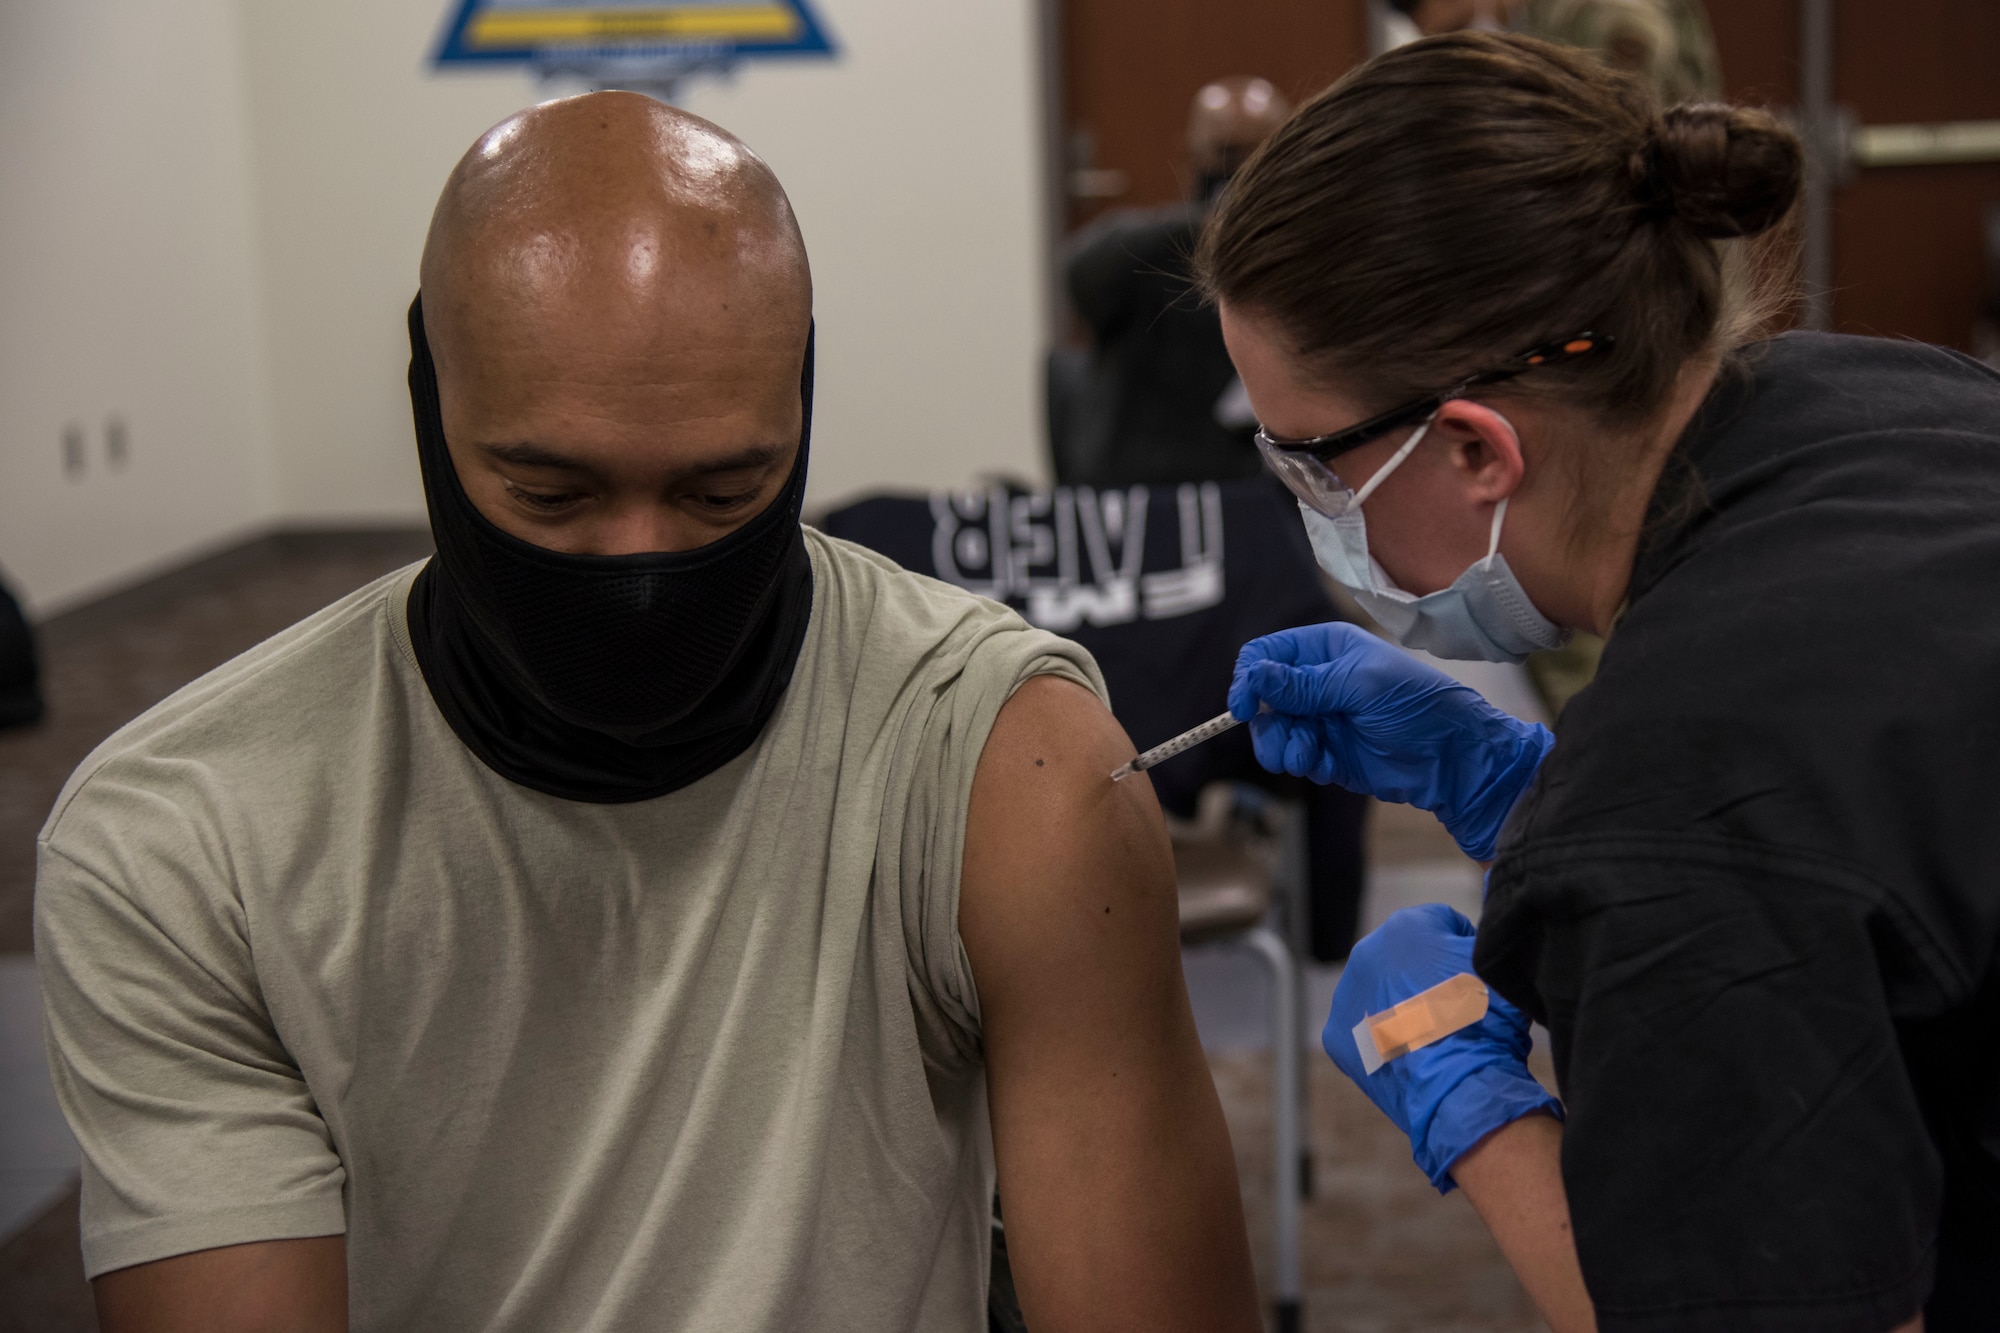 The Department of Defense is implementing a standardized and coordinated strategy for prioritizing, distributing, and administering the COVID-19 vaccine through a phased approach to all Active Duty, Reserve, National Guard, and all mission-essential DoD civilian employees and other personnel.